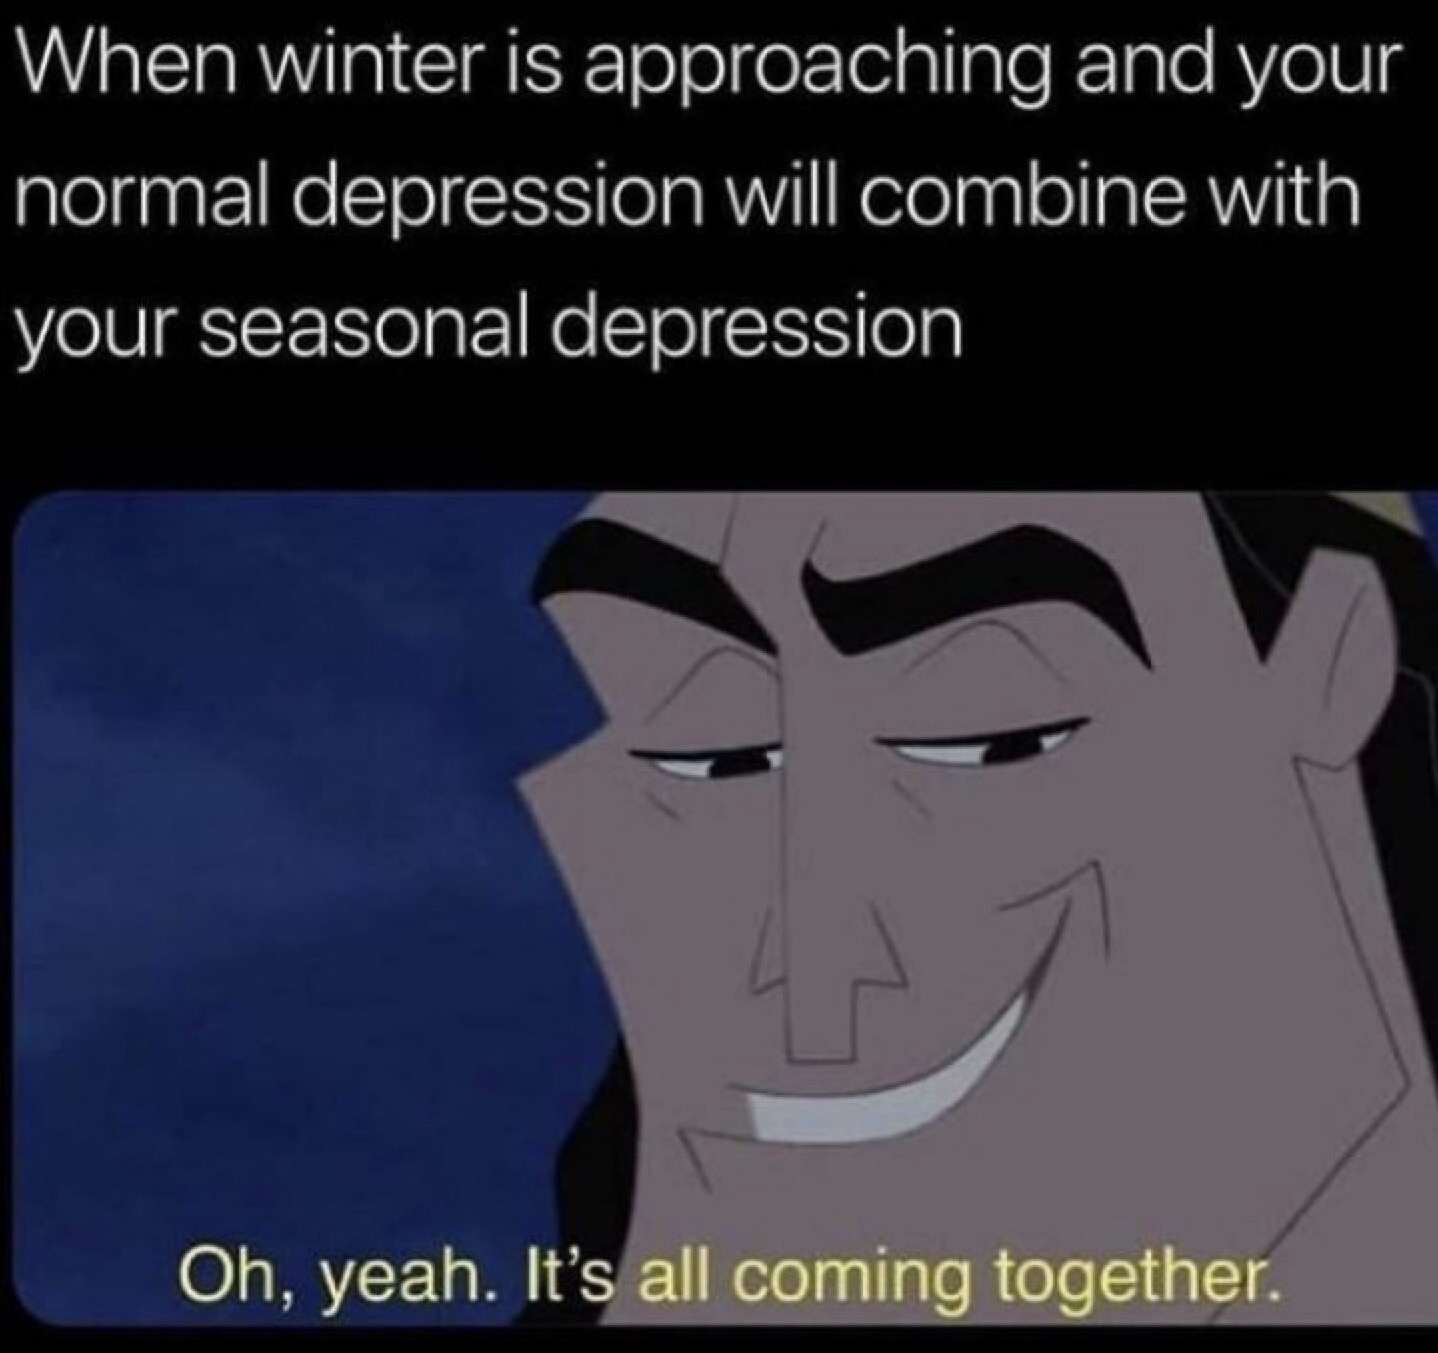 Humour - When winter is approaching and your normal depression will combine with your seasonal depression Oh, yeah. It's all coming together.